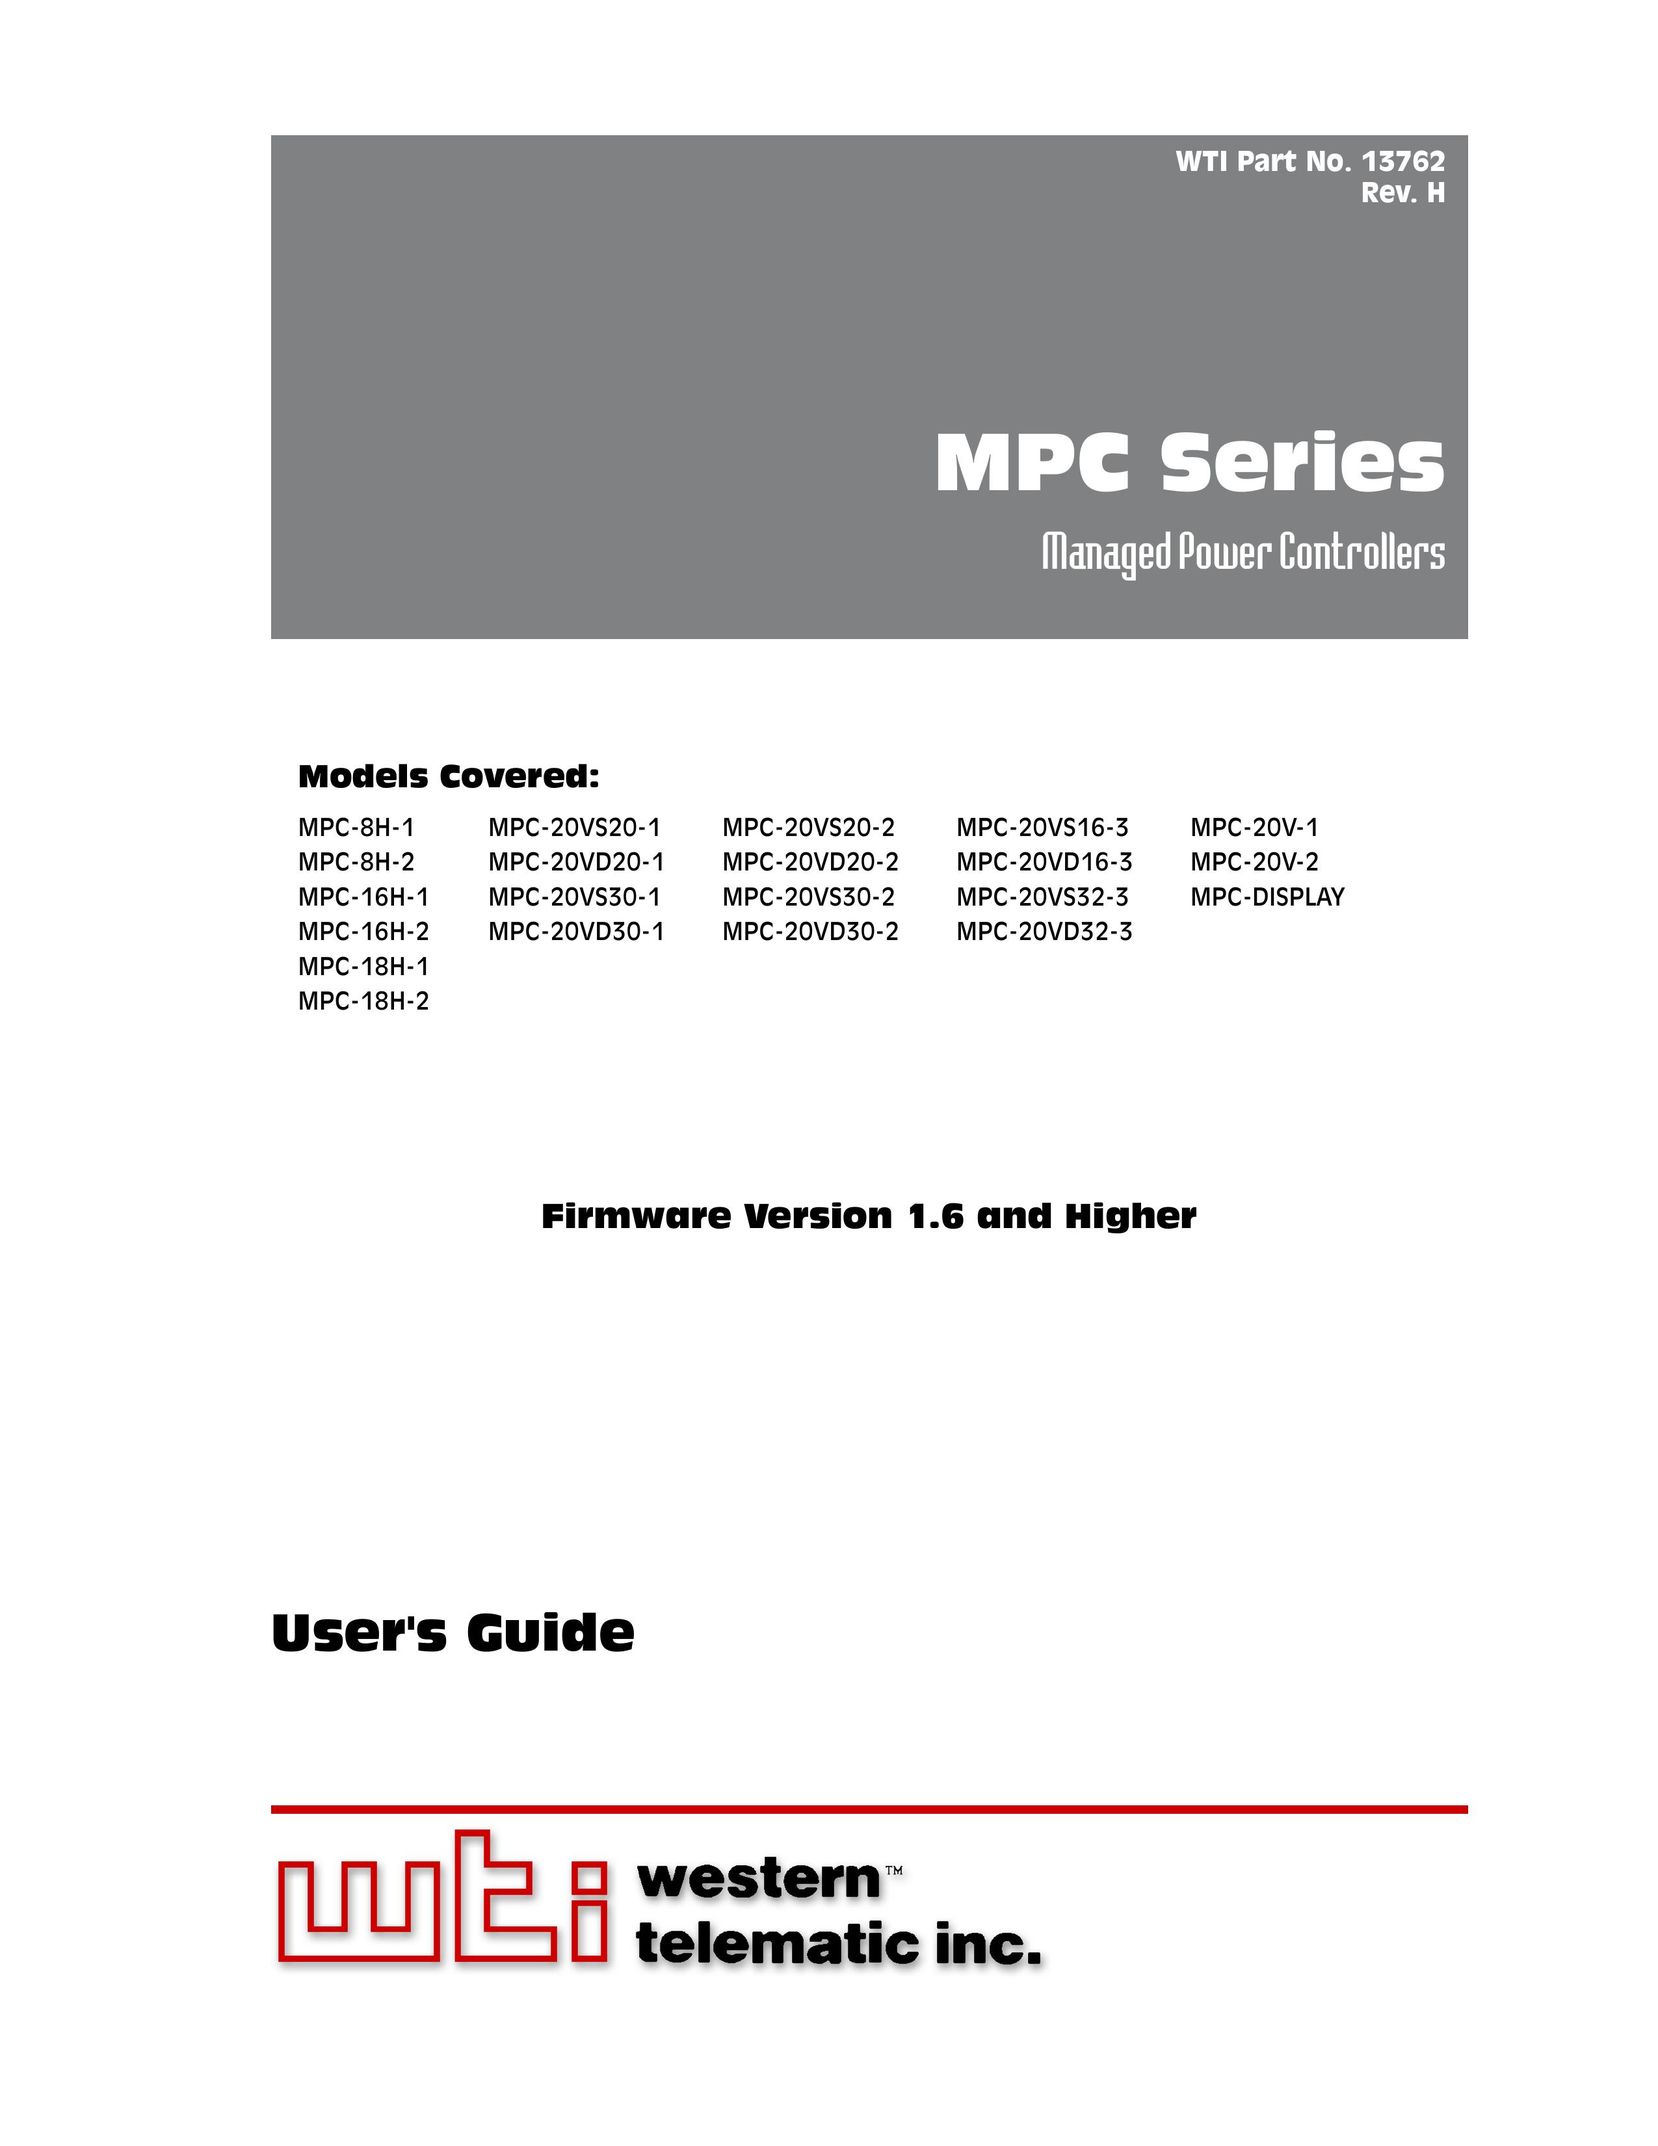 Western Telematic MPC-20V-2 Network Card User Manual